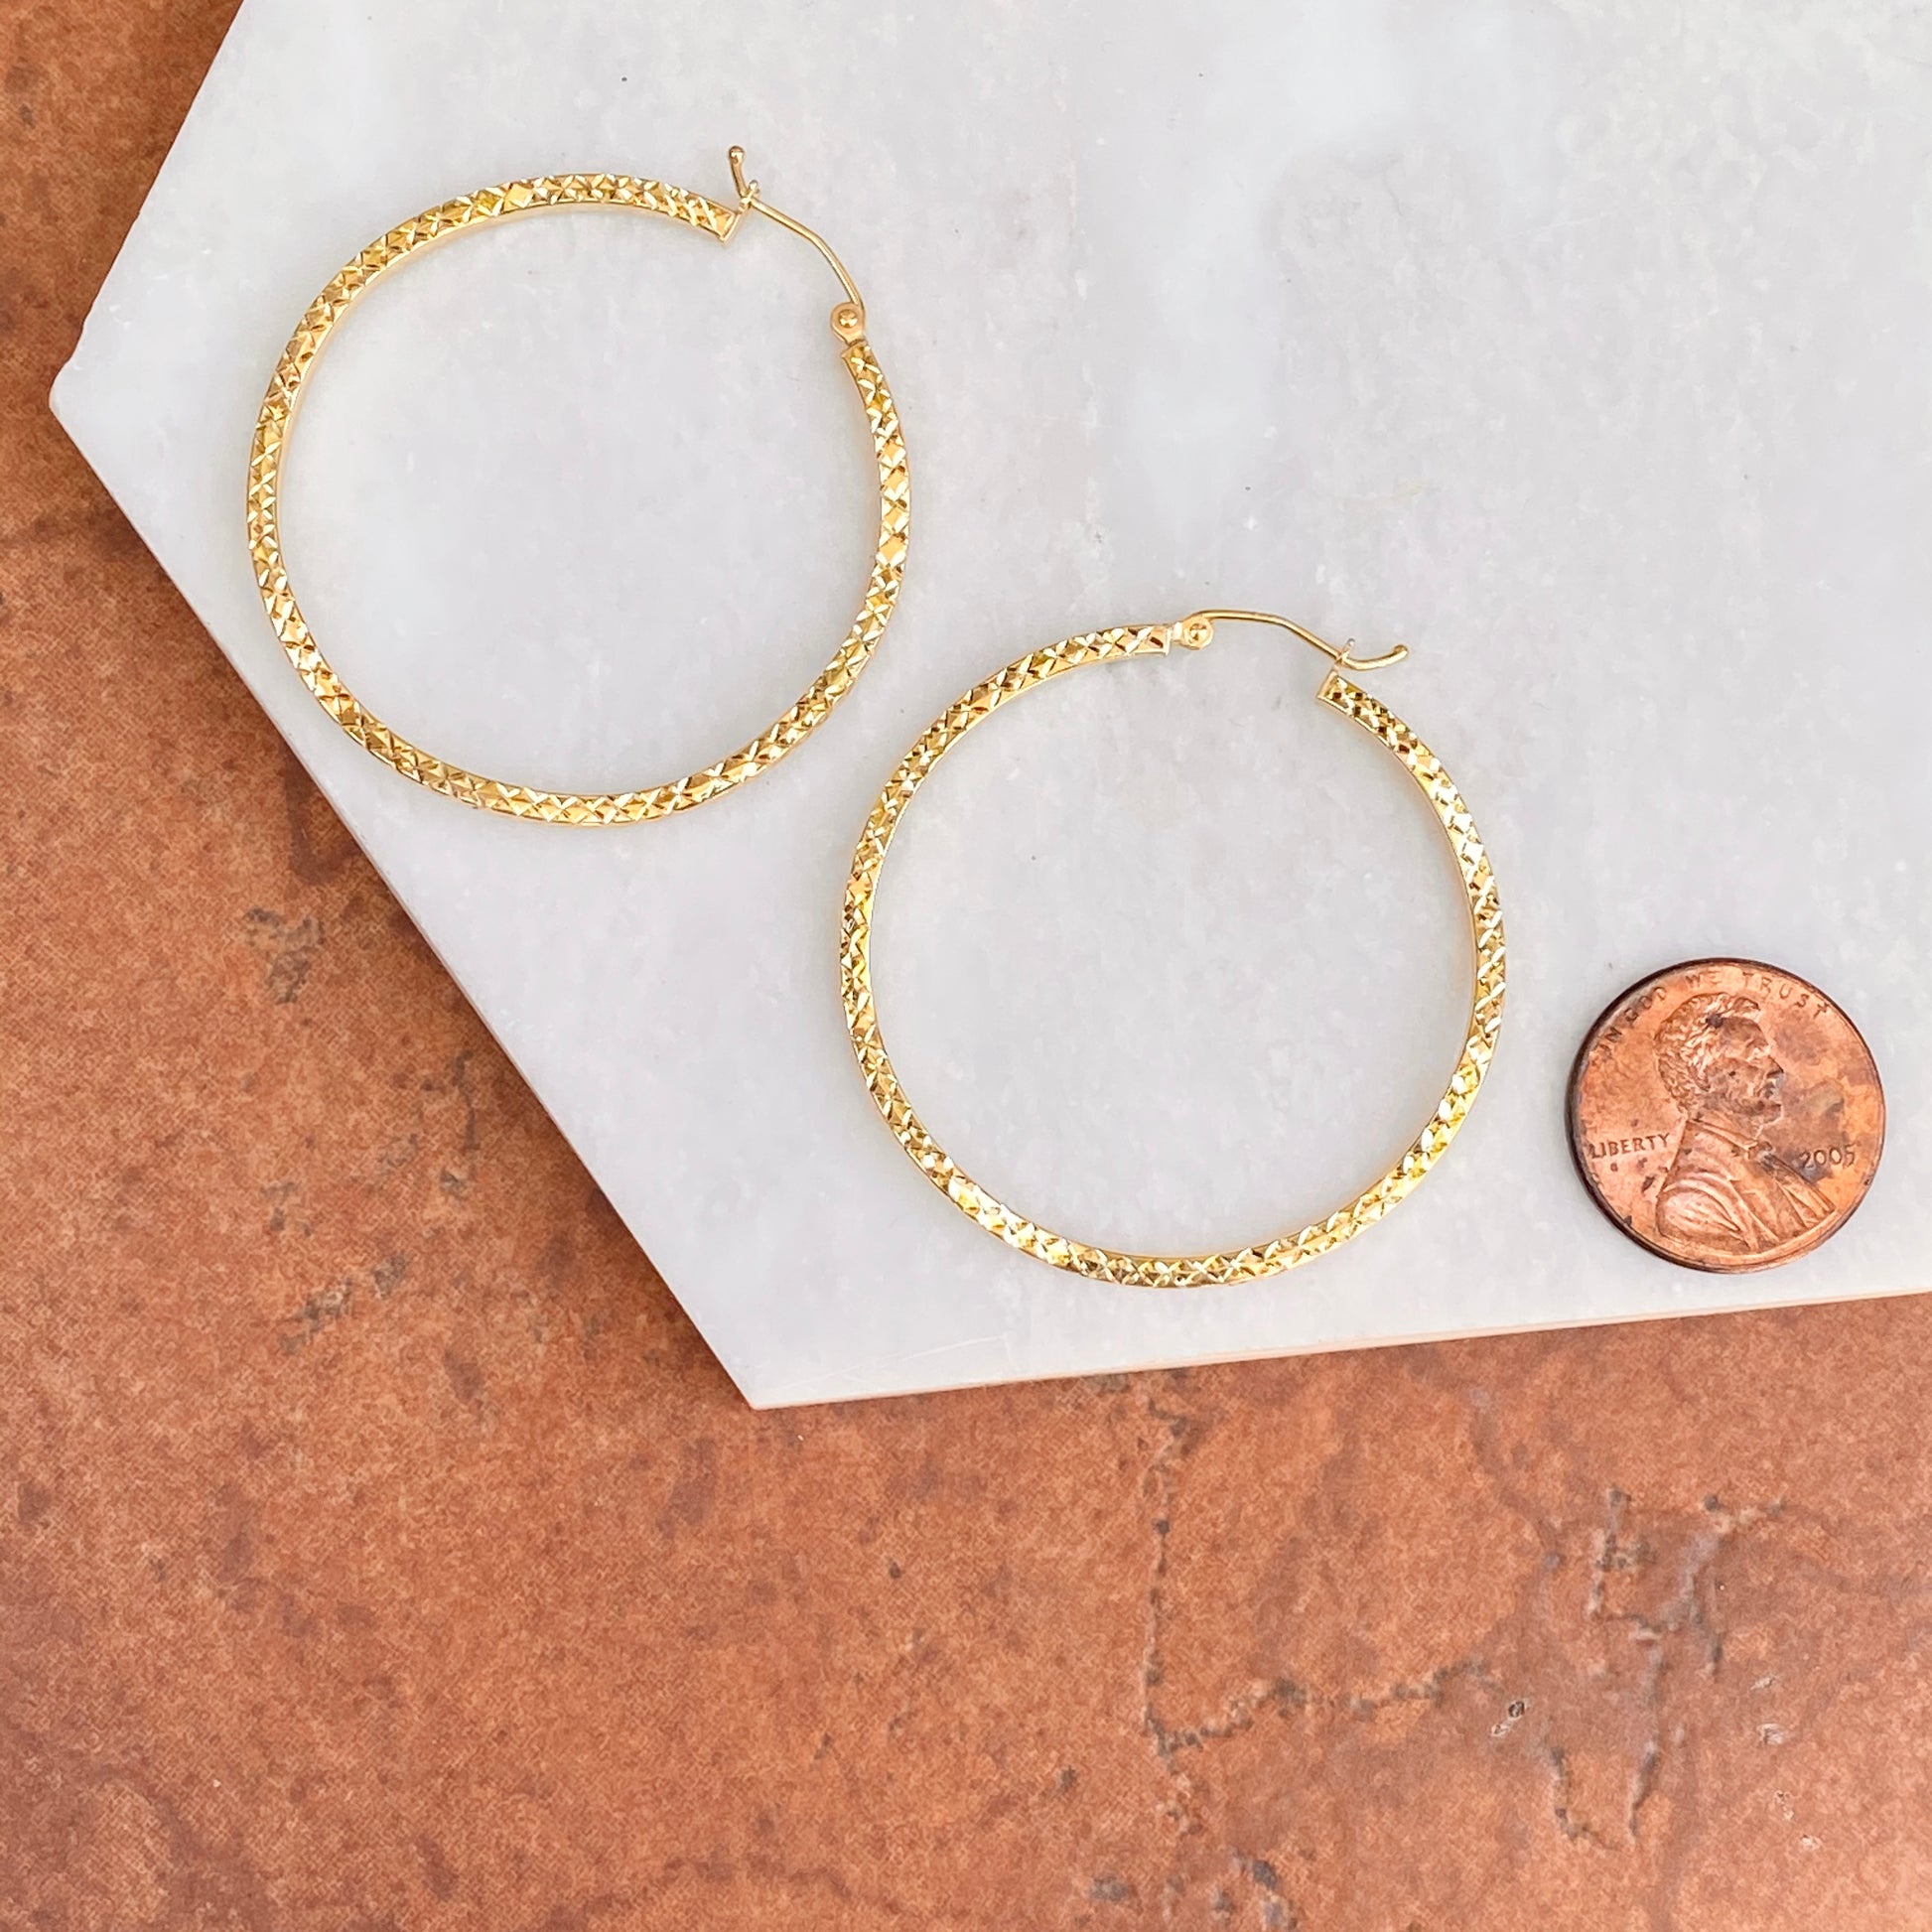 Gold-Plated Sterling Silver Wavy Diamond-Cut Hoop Earrings 41mm, Gold-Plated Sterling Silver Wavy Diamond-Cut Hoop Earrings 41mm - Legacy Saint Jewelry